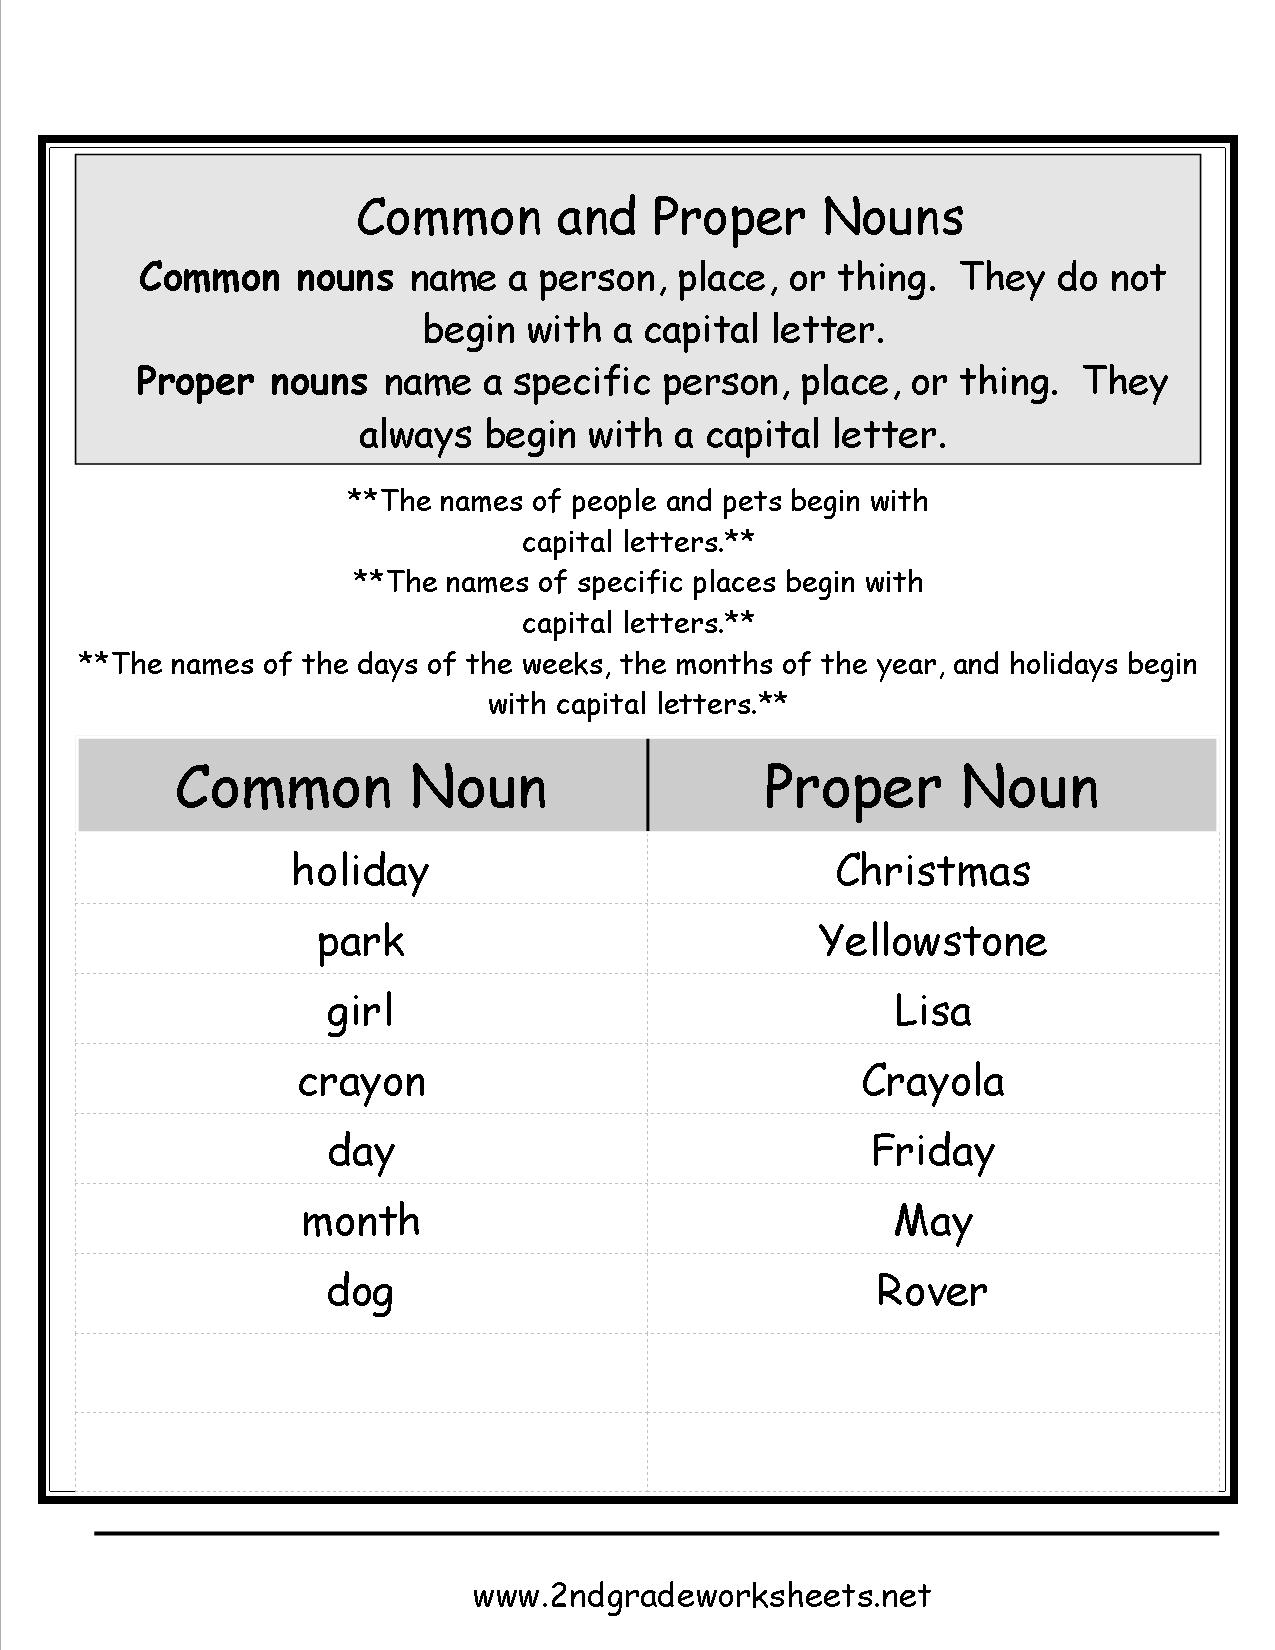 18-best-images-of-common-and-proper-noun-sort-worksheet-common-noun-proper-noun-worksheet